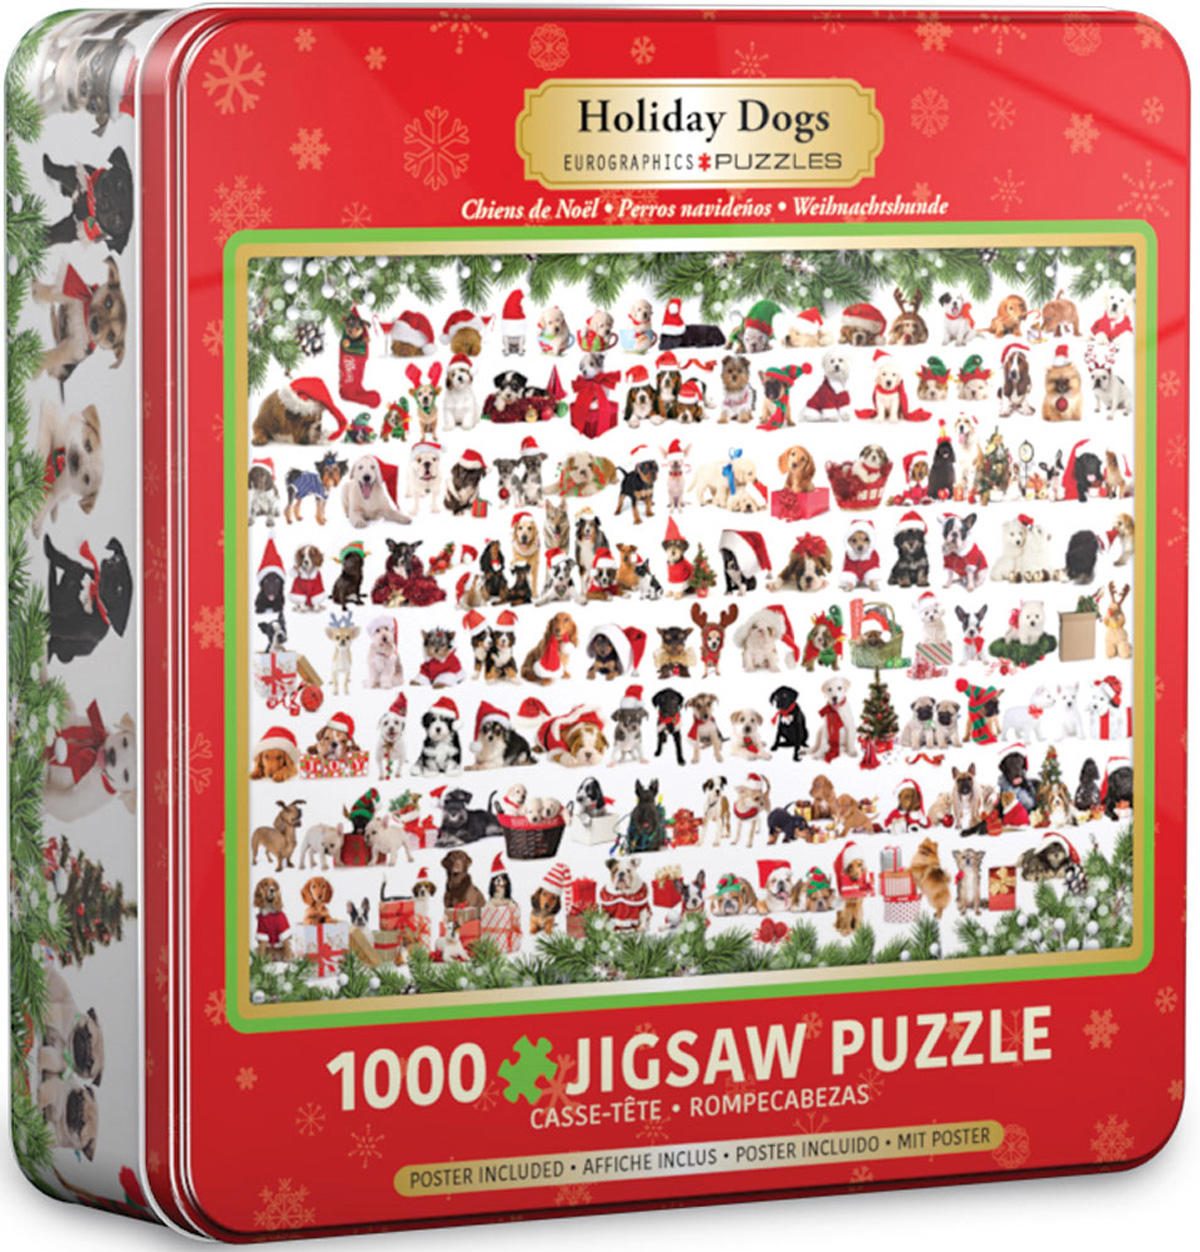 Puzzle Caja metálica - Lata Holiday Dogs